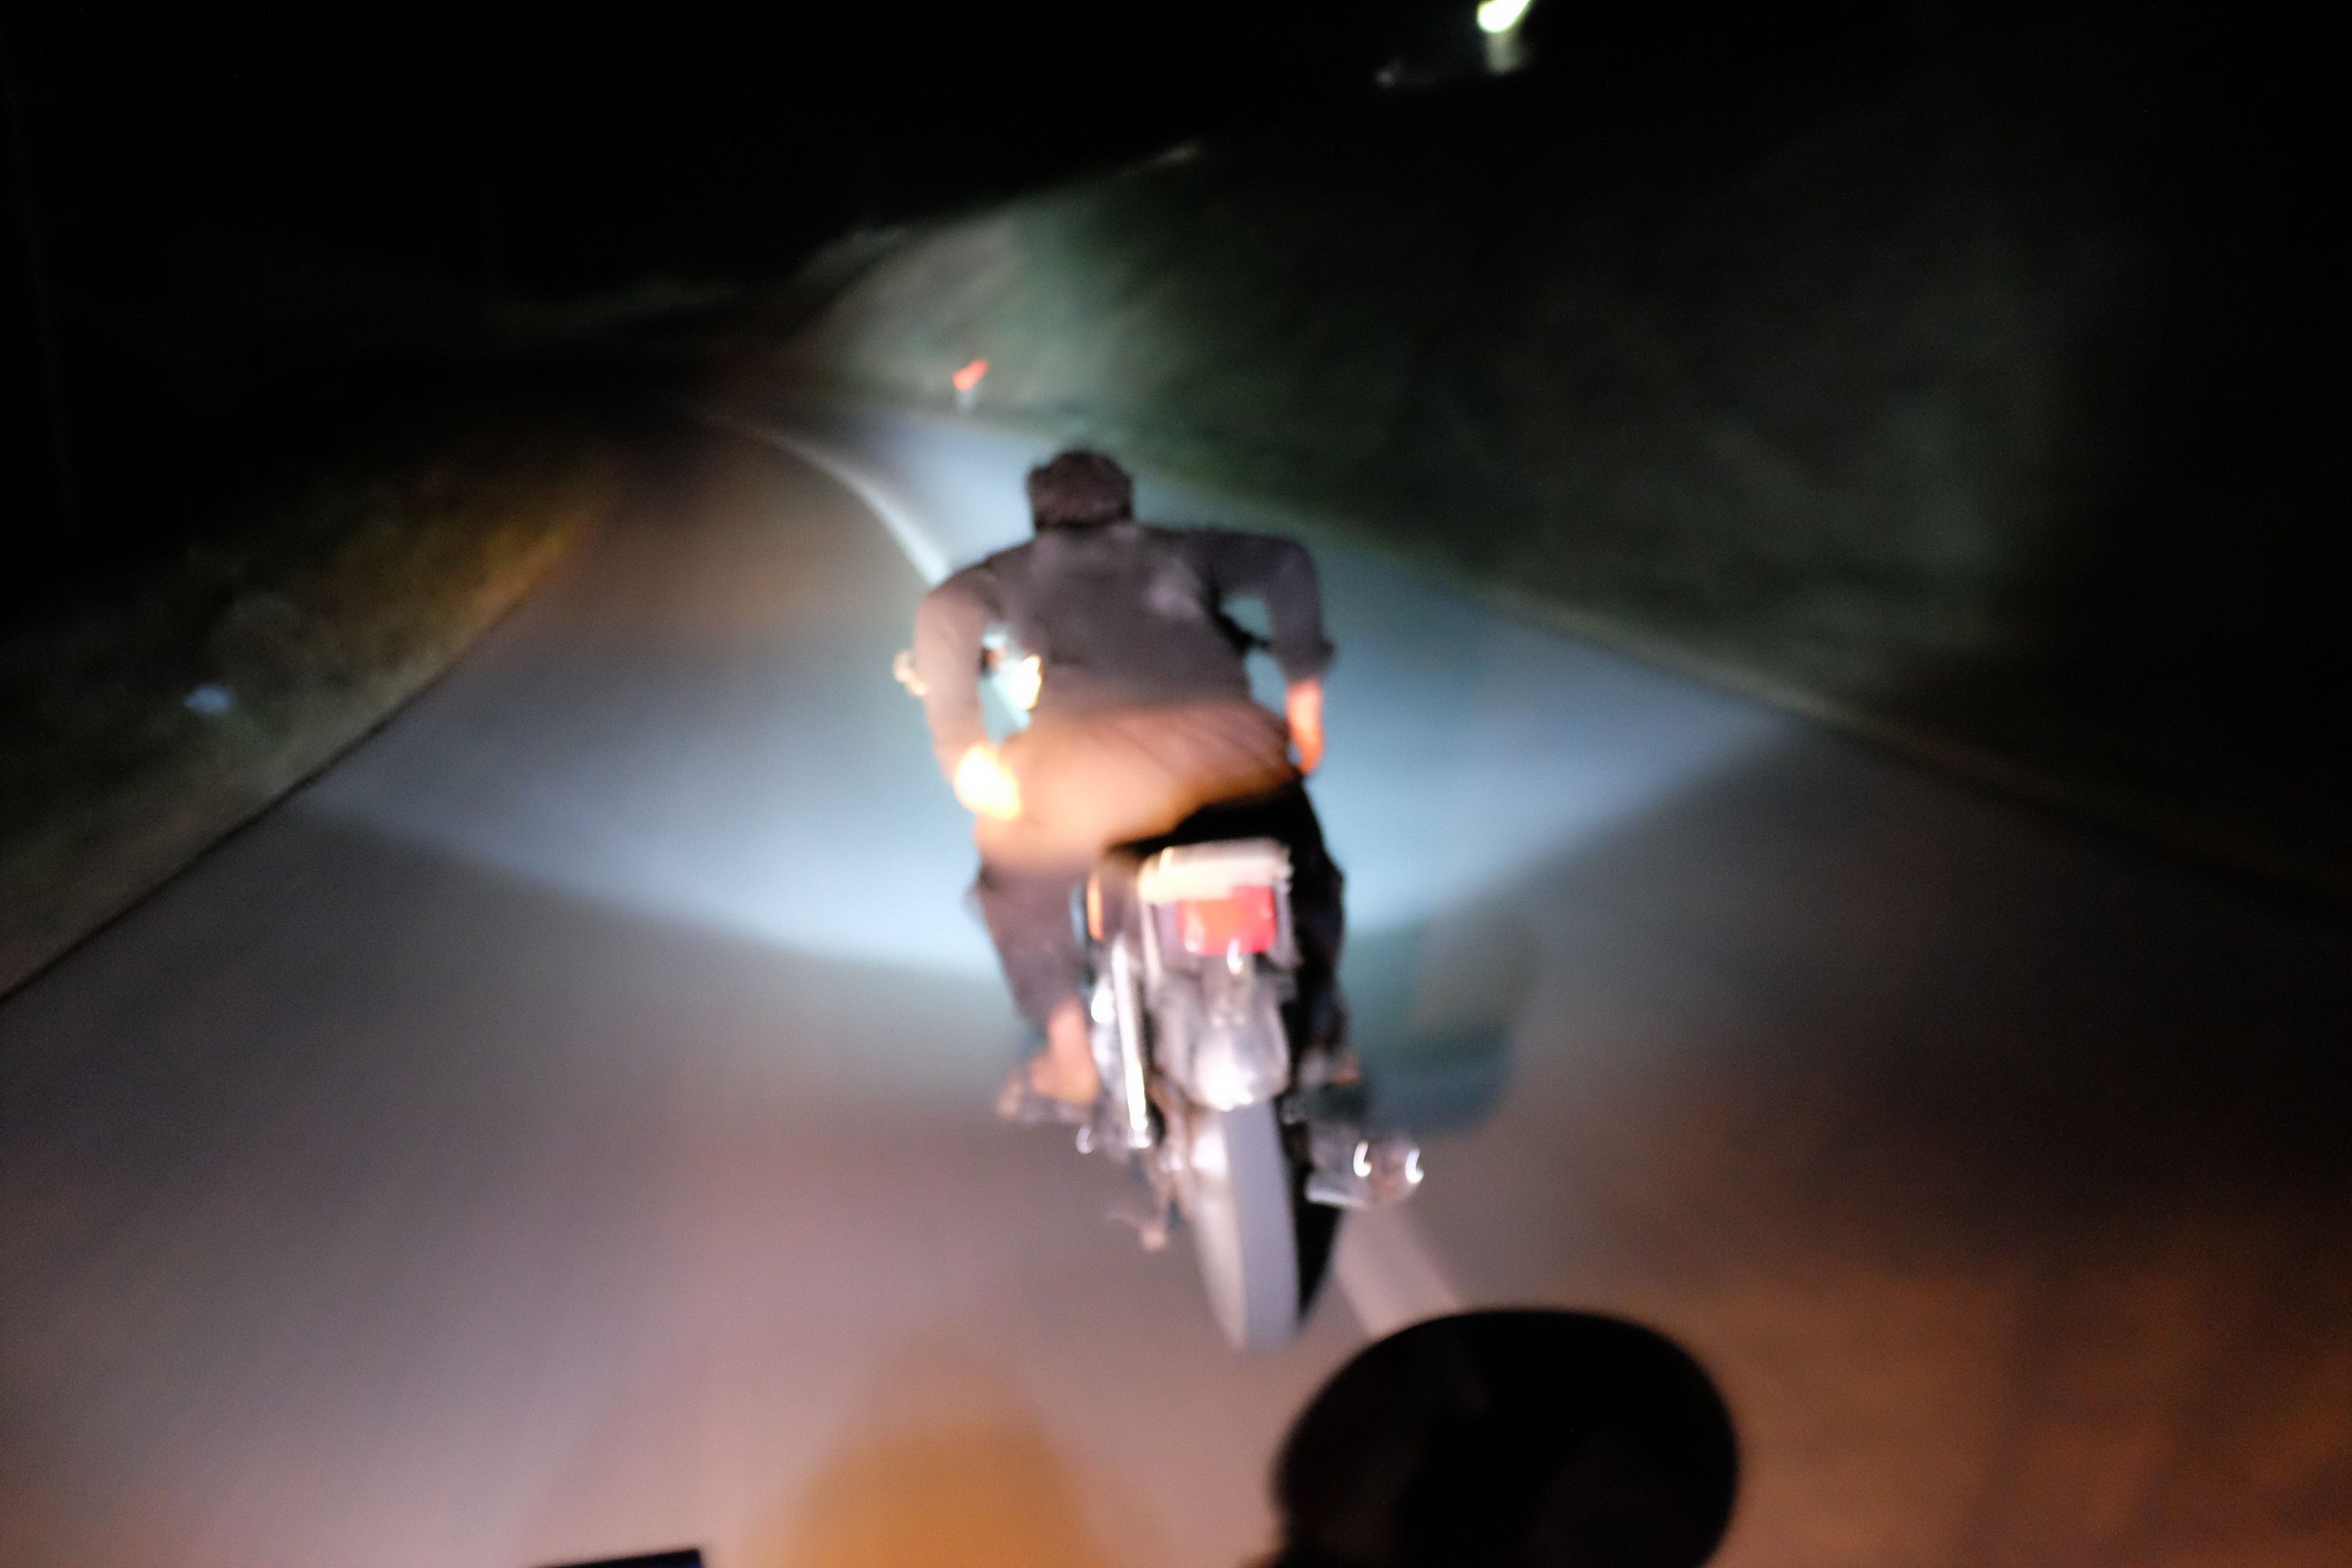 A man in traditional Kurdish dress rides a motorcycle at night without holding on to its handlebars, as seen from another motorcycle.